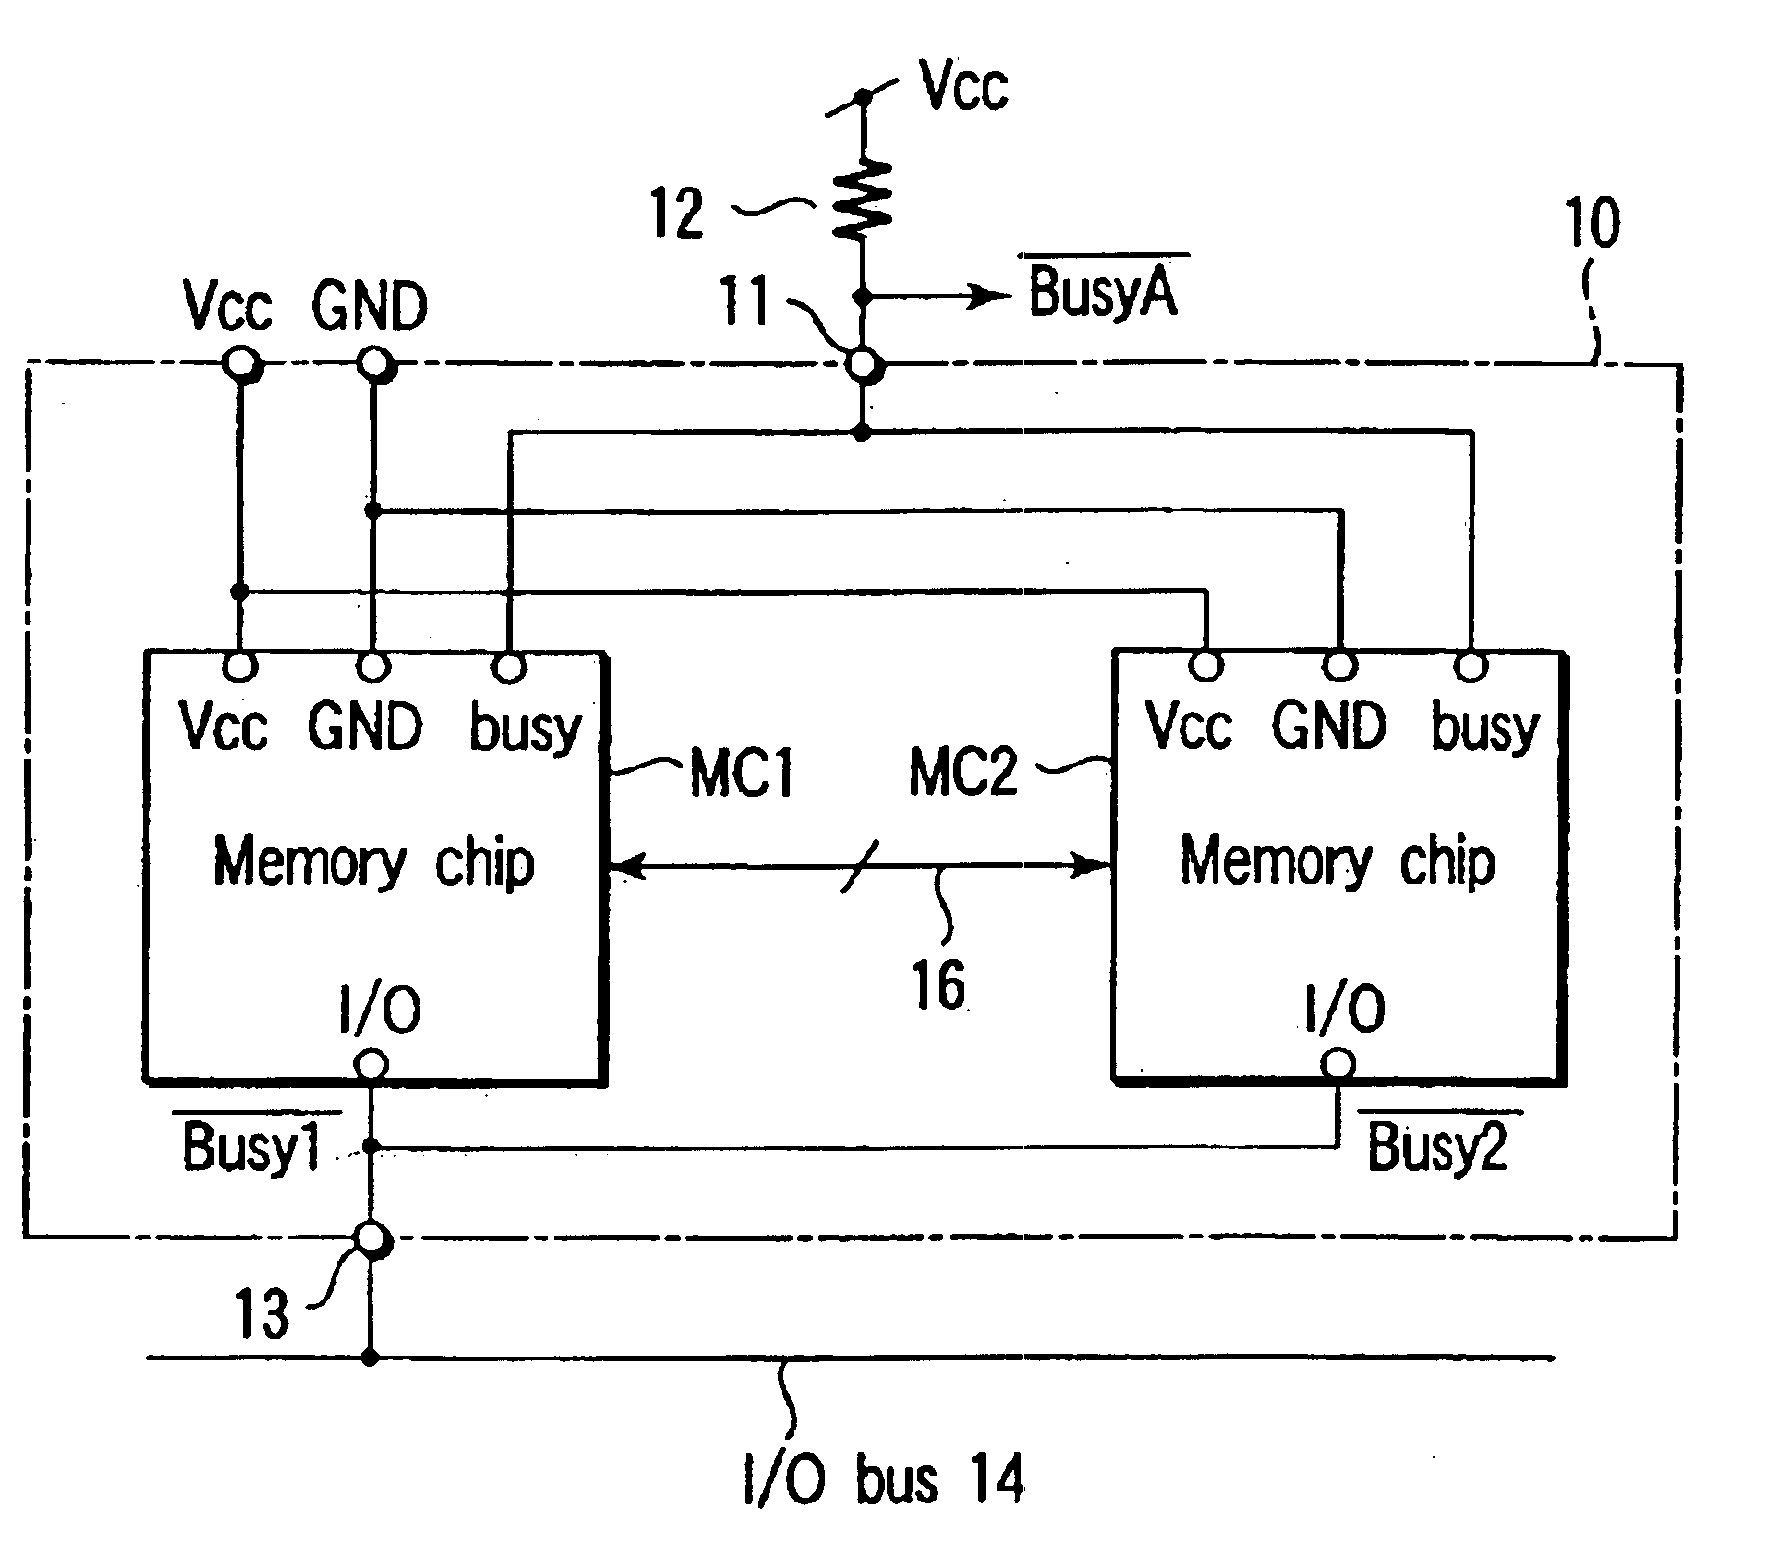 Semiconductor memory device having a plurality of chips and capability of outputting a busy signal